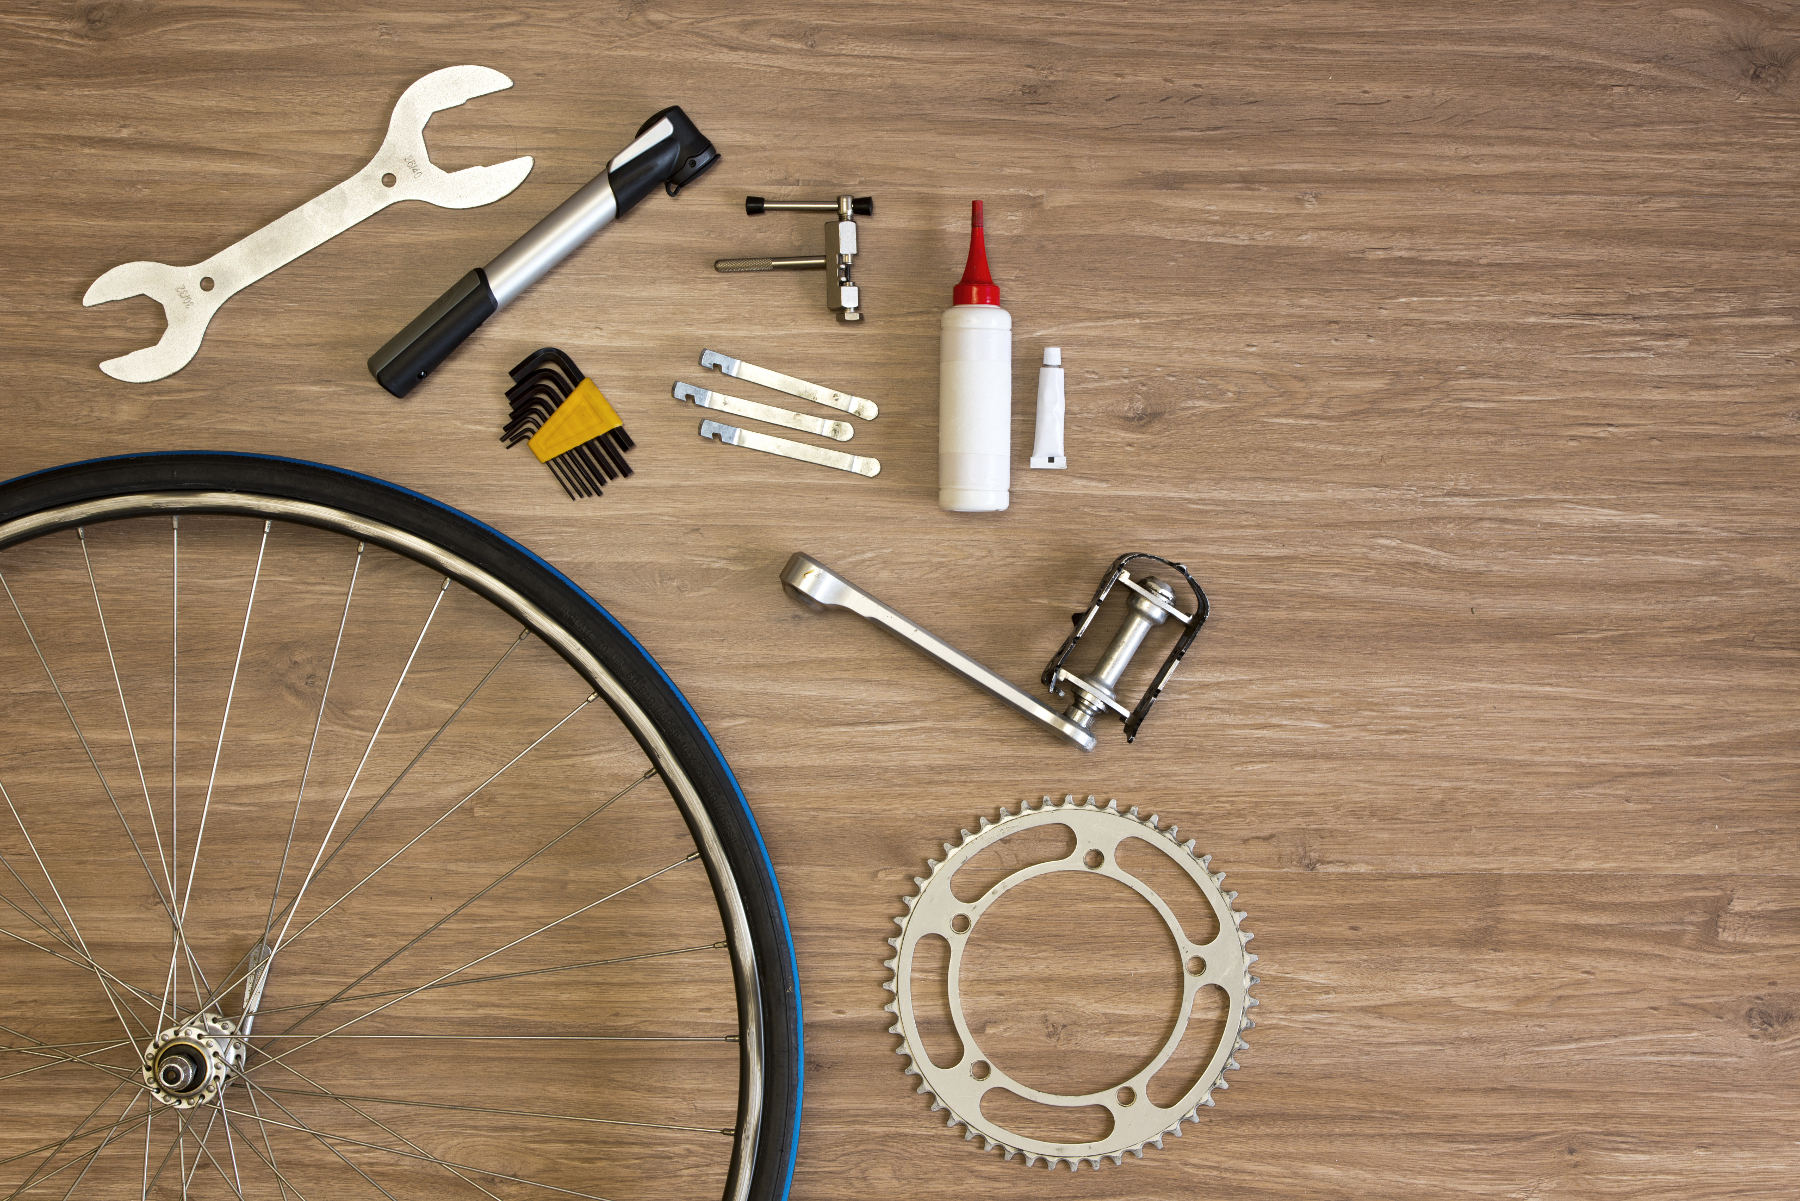 Does your club or group need an evening basic maintenance? TheBikeFix.ie provides classes.-1